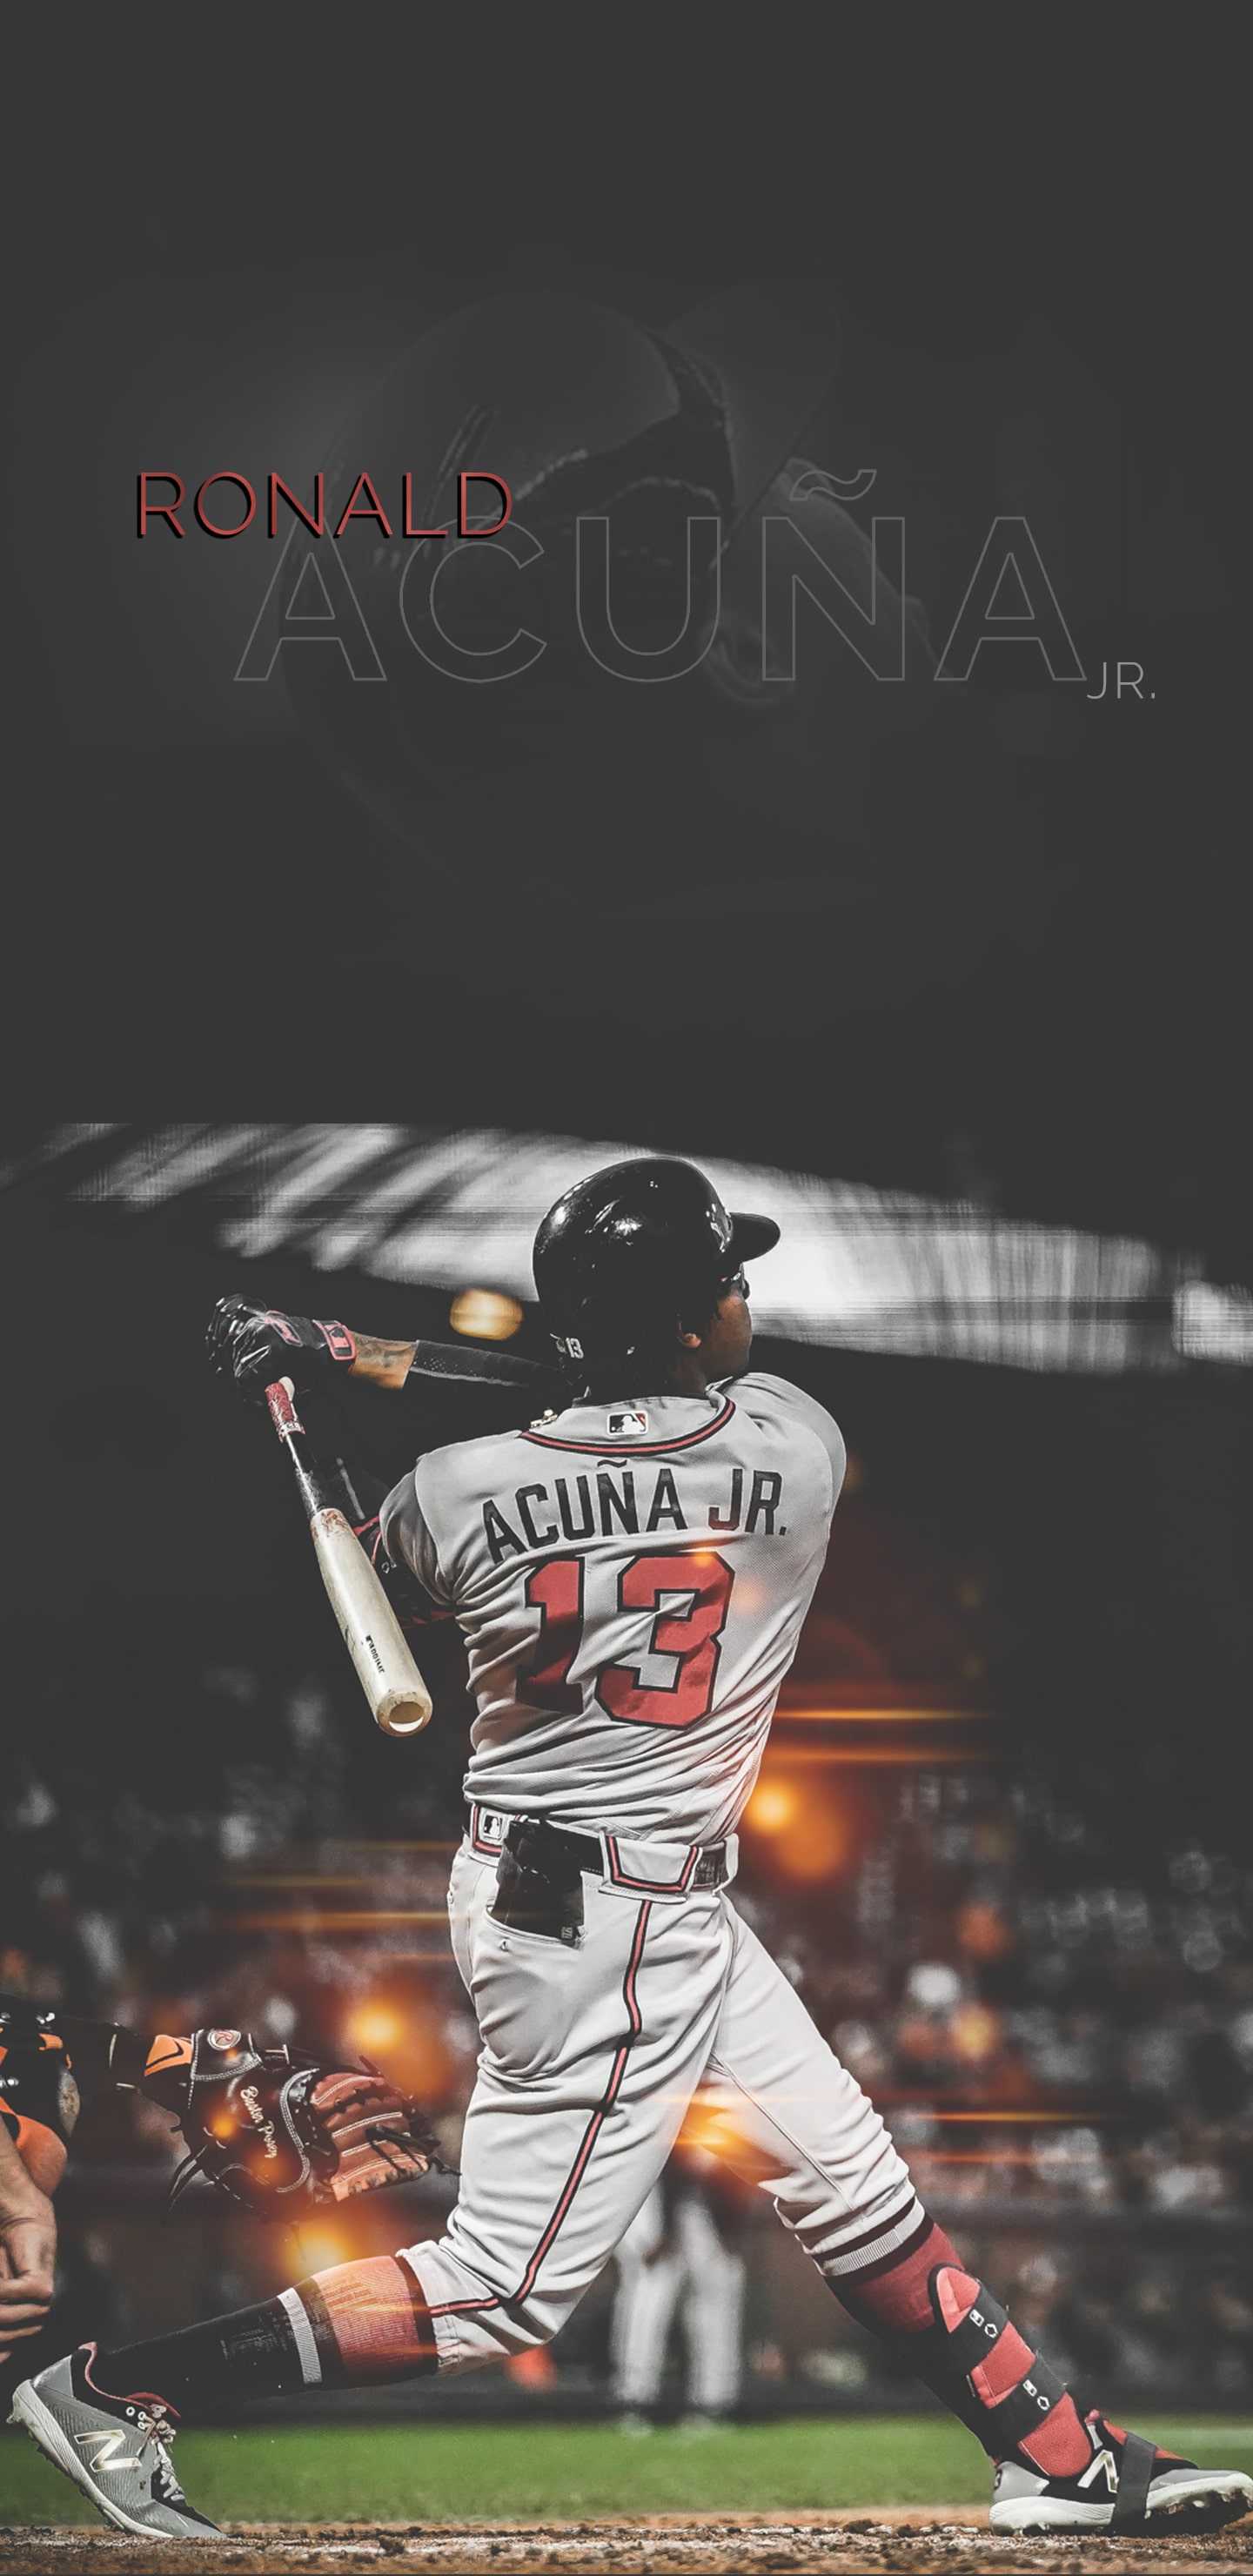 Ronald Acuna Jr. Wallpapers - KoLPaPer - Awesome Free HD Wallpapers